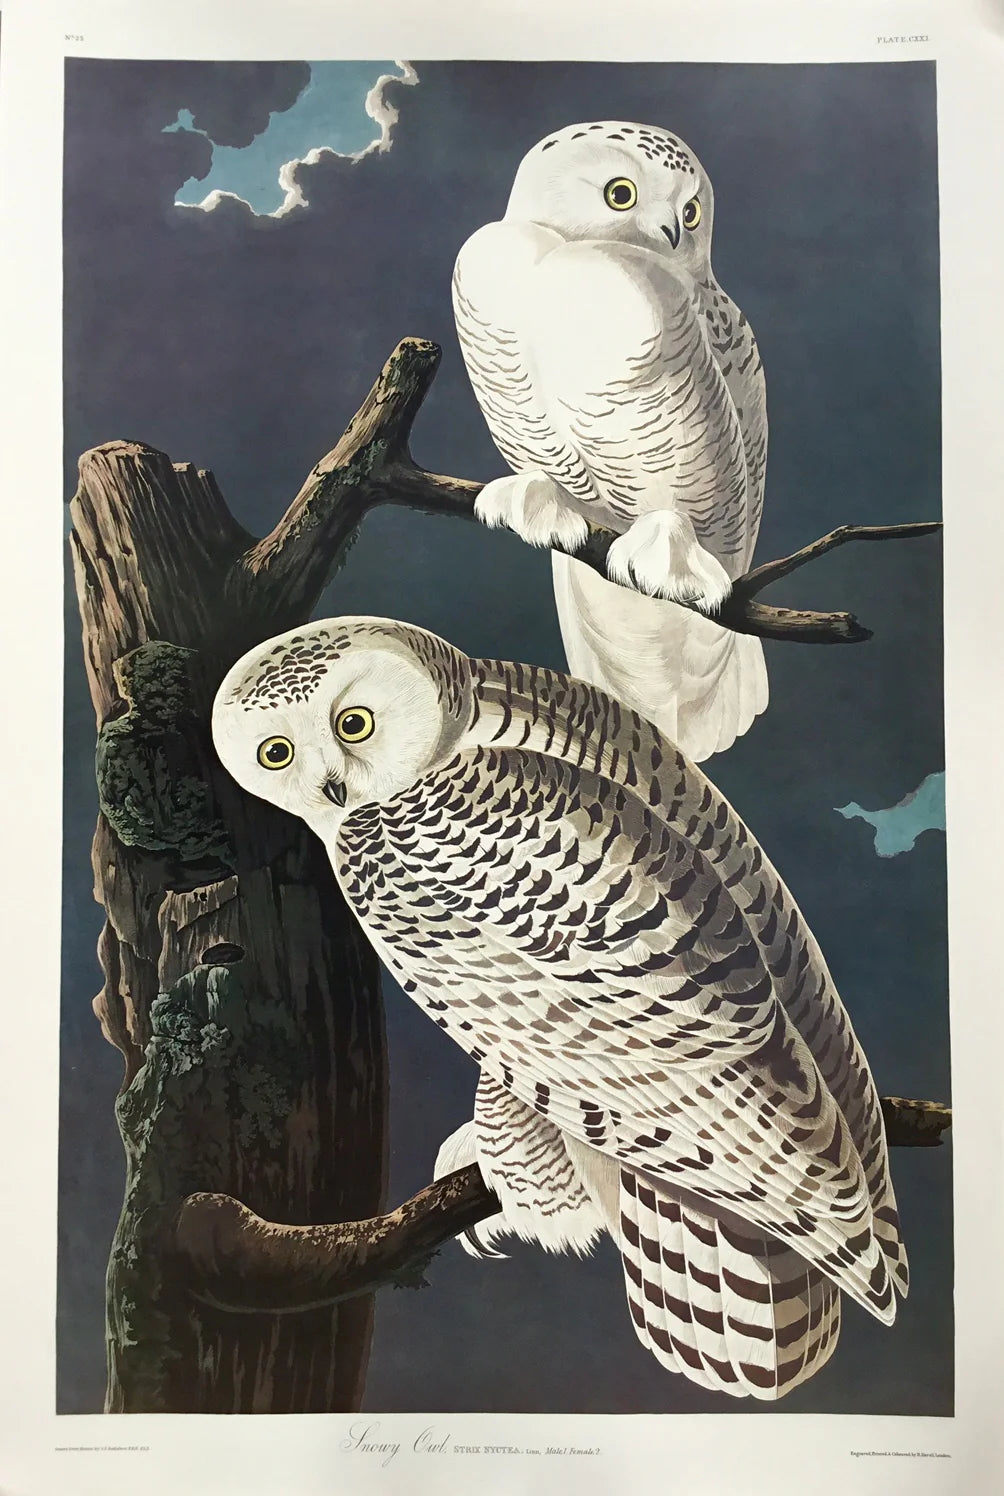 Princeton Audubon Double Elephant Edition, 27 1/4 x 39 1/4  This portrait was based on a composition probably painted in 1829 on the East coast.   Audubon gave these birds one of the only nocturnal settings found in The Birds of America.  He used pencil to portray the owl's soft, downy feathers.